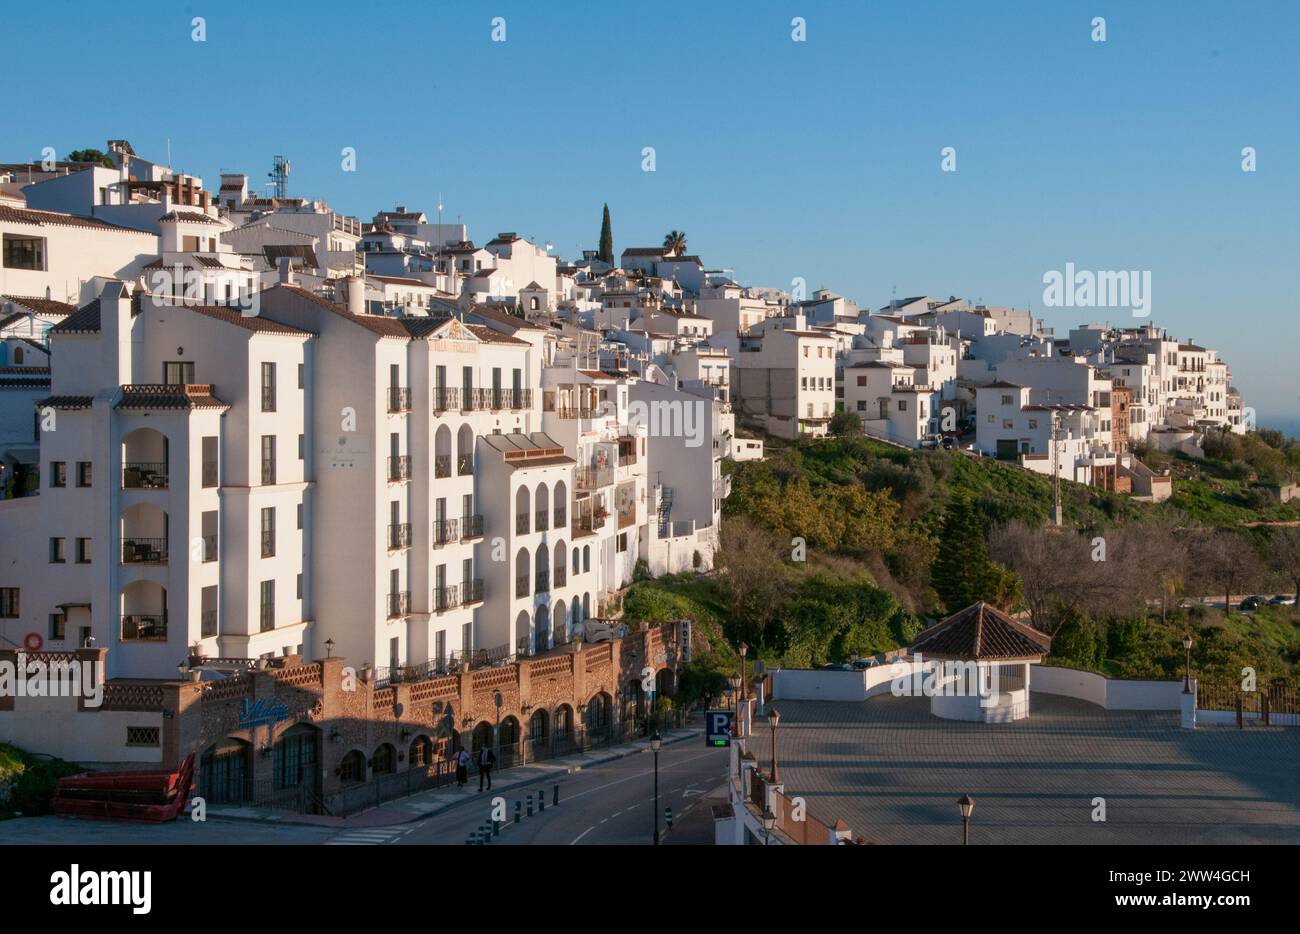 Looking across from the Casco Vieja (Old Town) of Frigiliana to the Casco Nueva or New Town, in the Sierra Almijara ranges of Andalucia, Spain Stock Photo